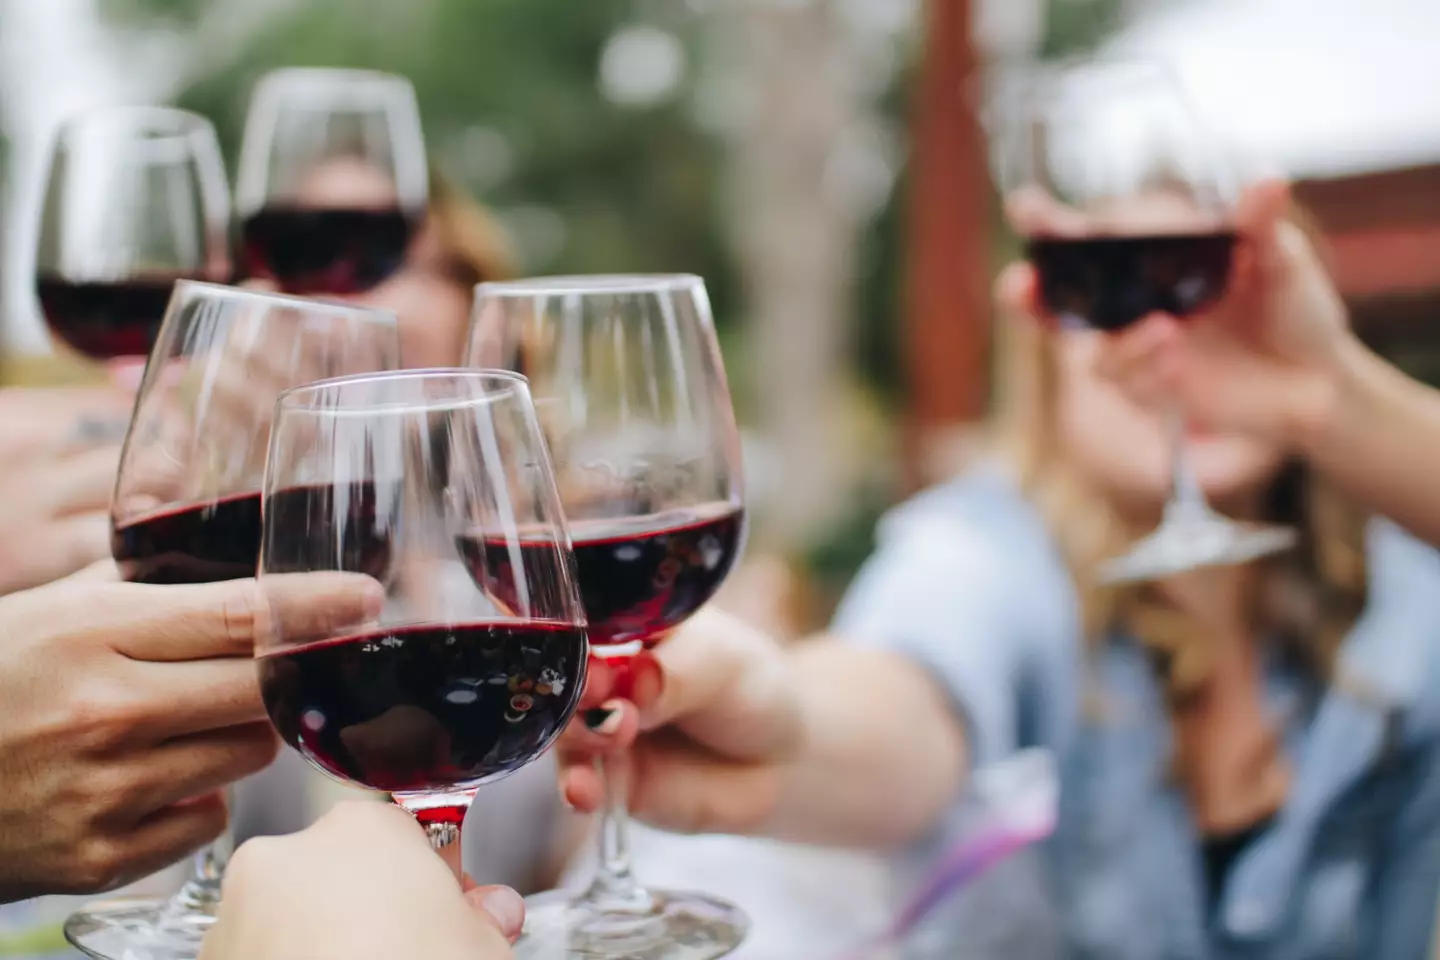 Millennials and Gen-Z are opting for alcohol-free wines and beers.